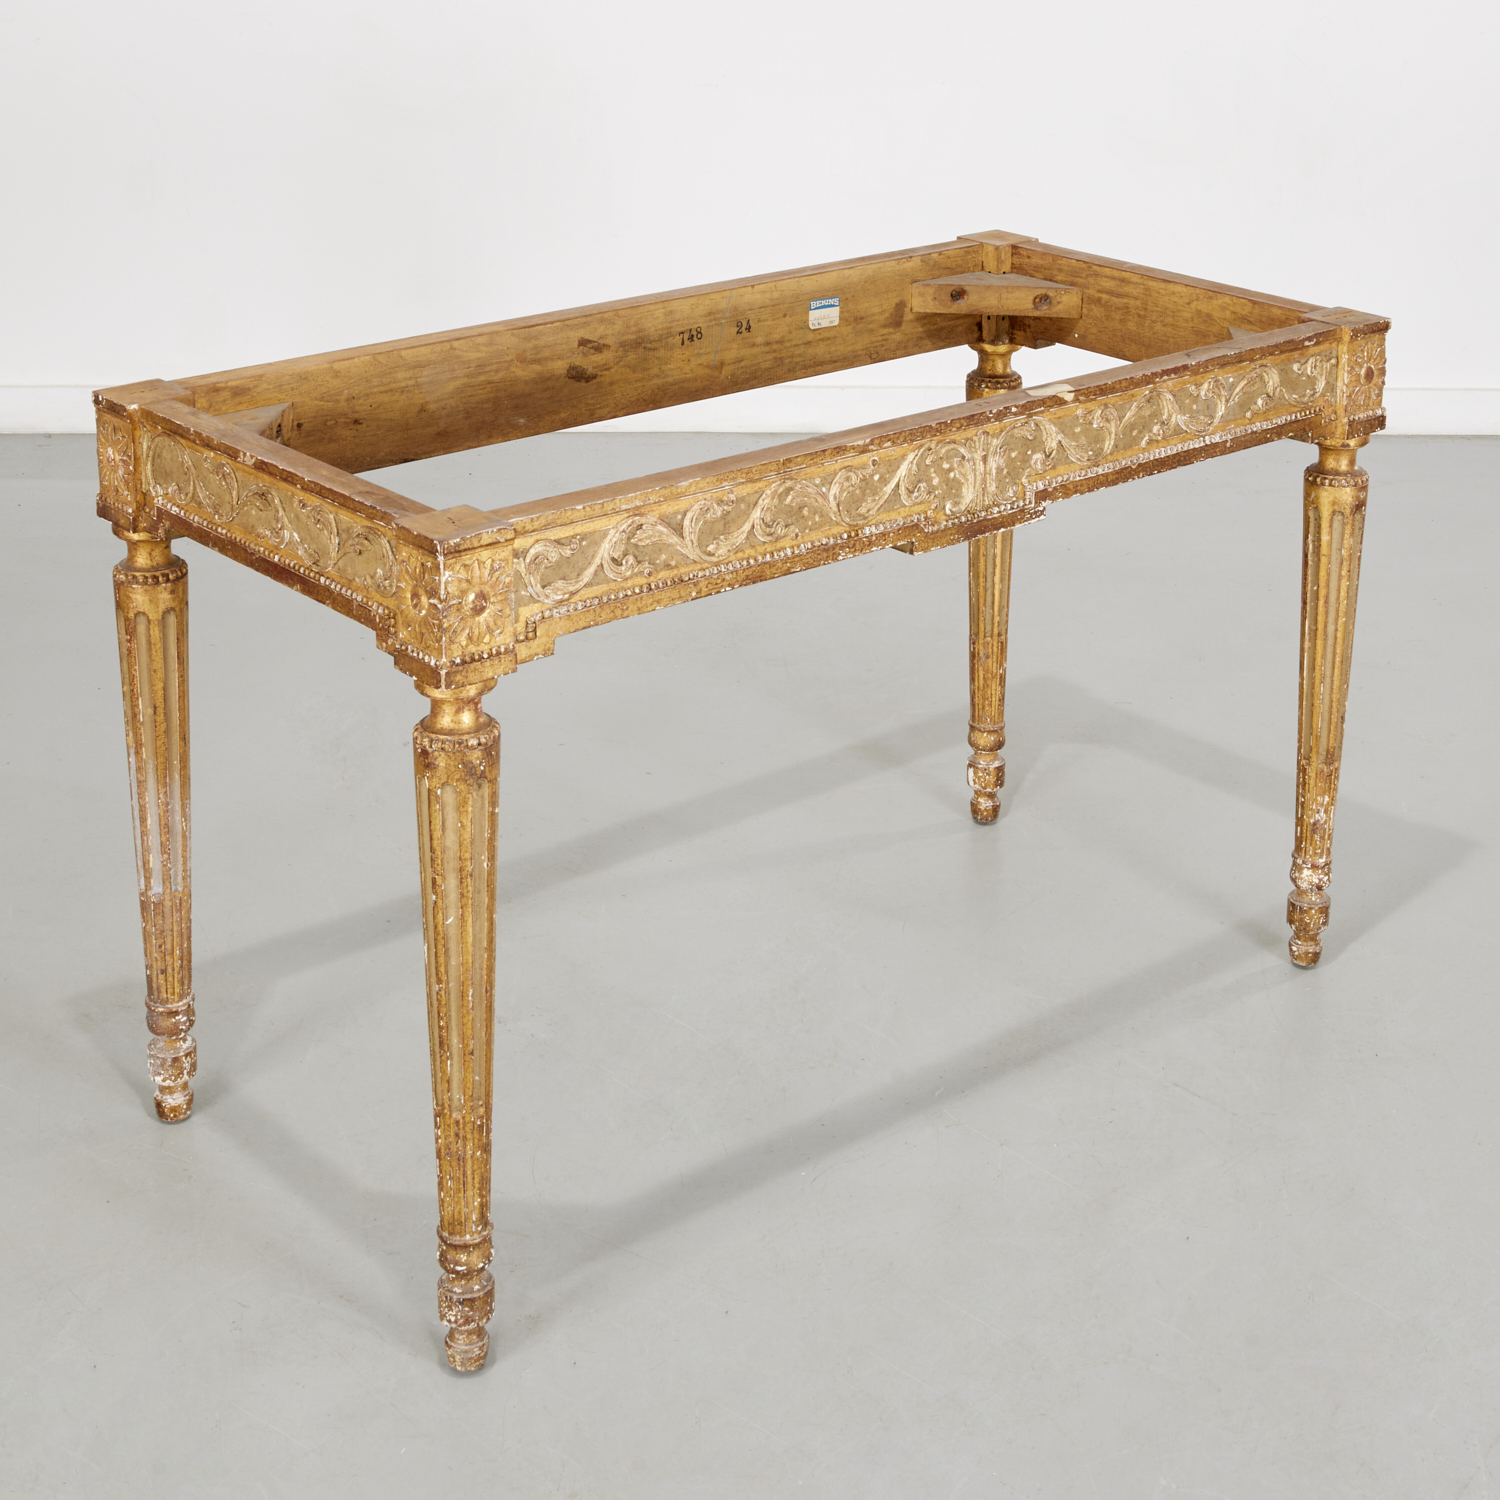 LOUIS XVI STYLE CONSOLE TABLE,